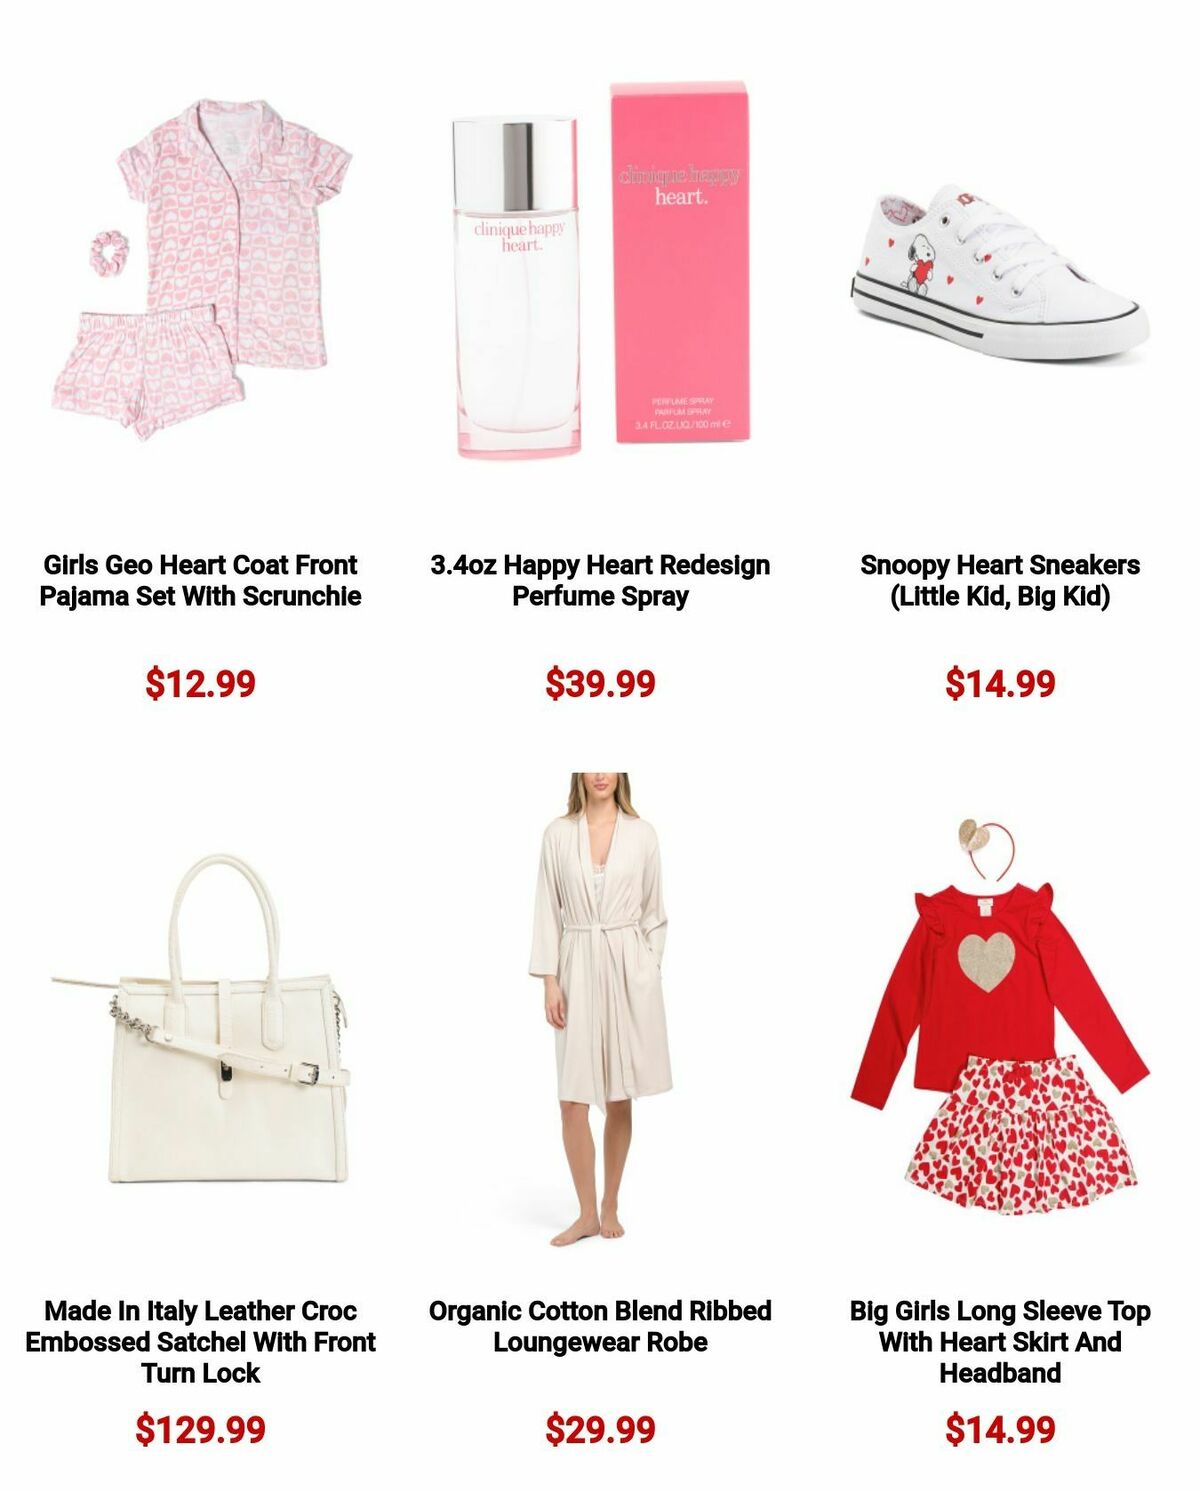 Marshalls Valentine's Day Weekly Ad from January 28